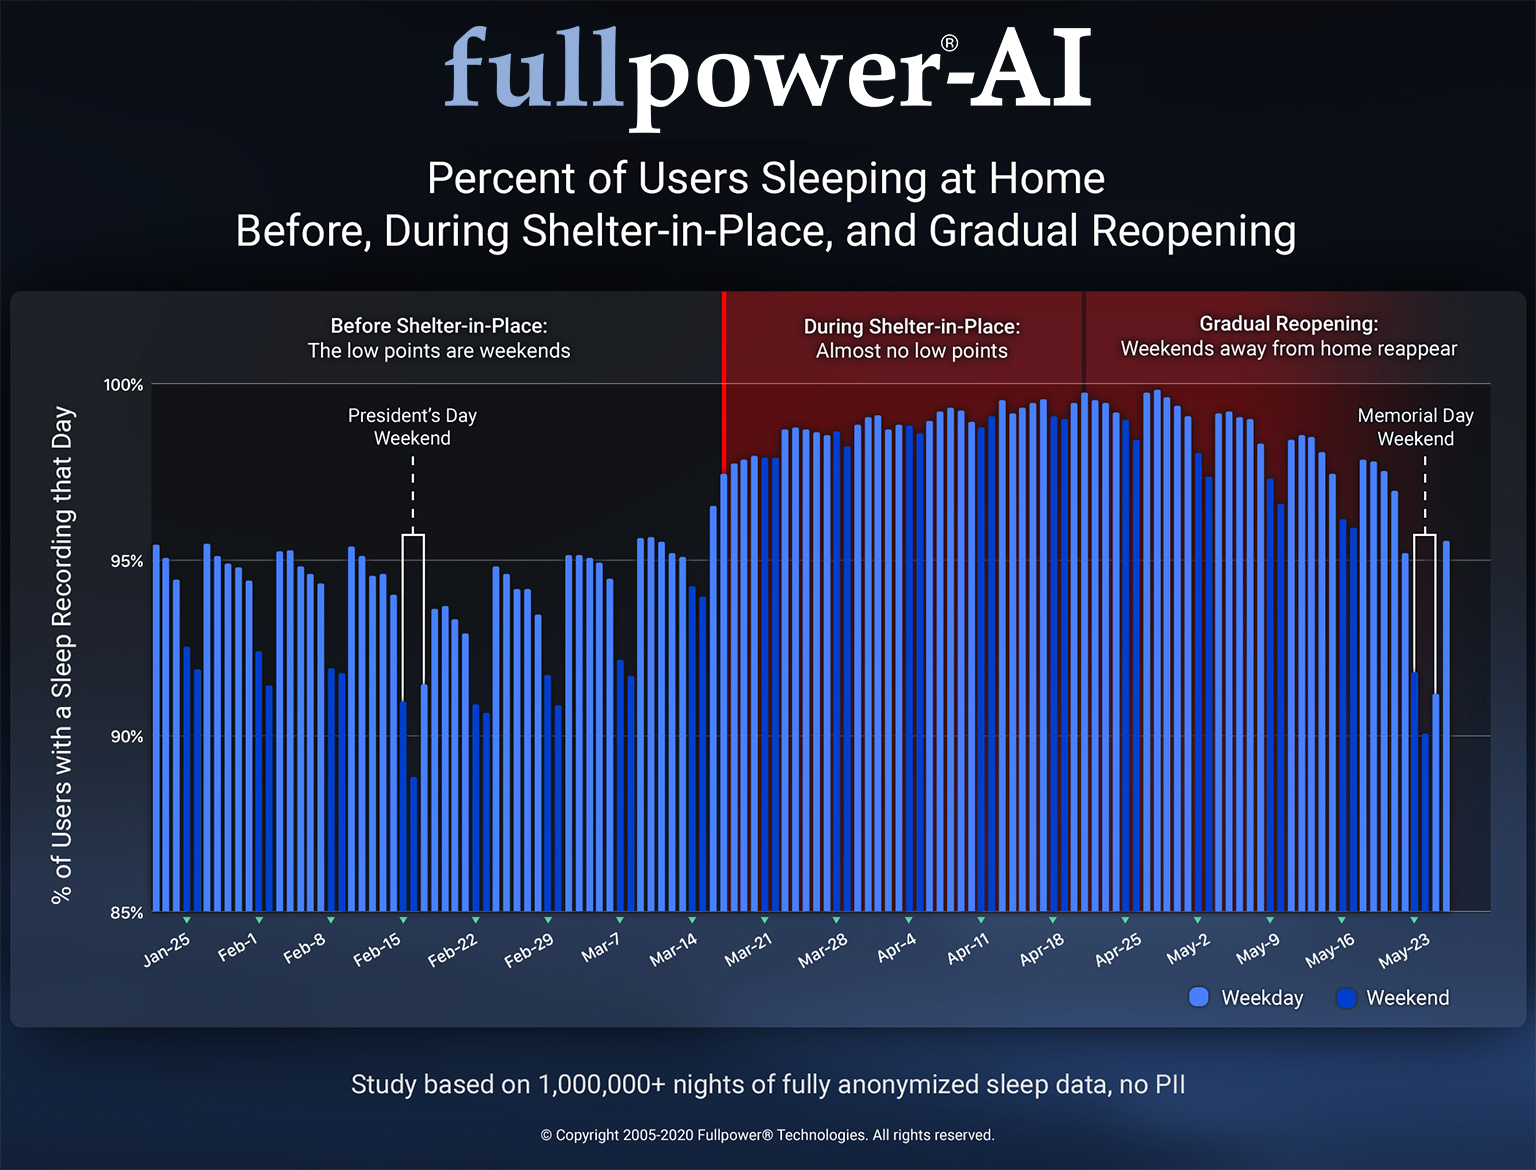 Percent of Users Sleeping at Home Before, During Shelter-in-Place, and Gradual Reopening